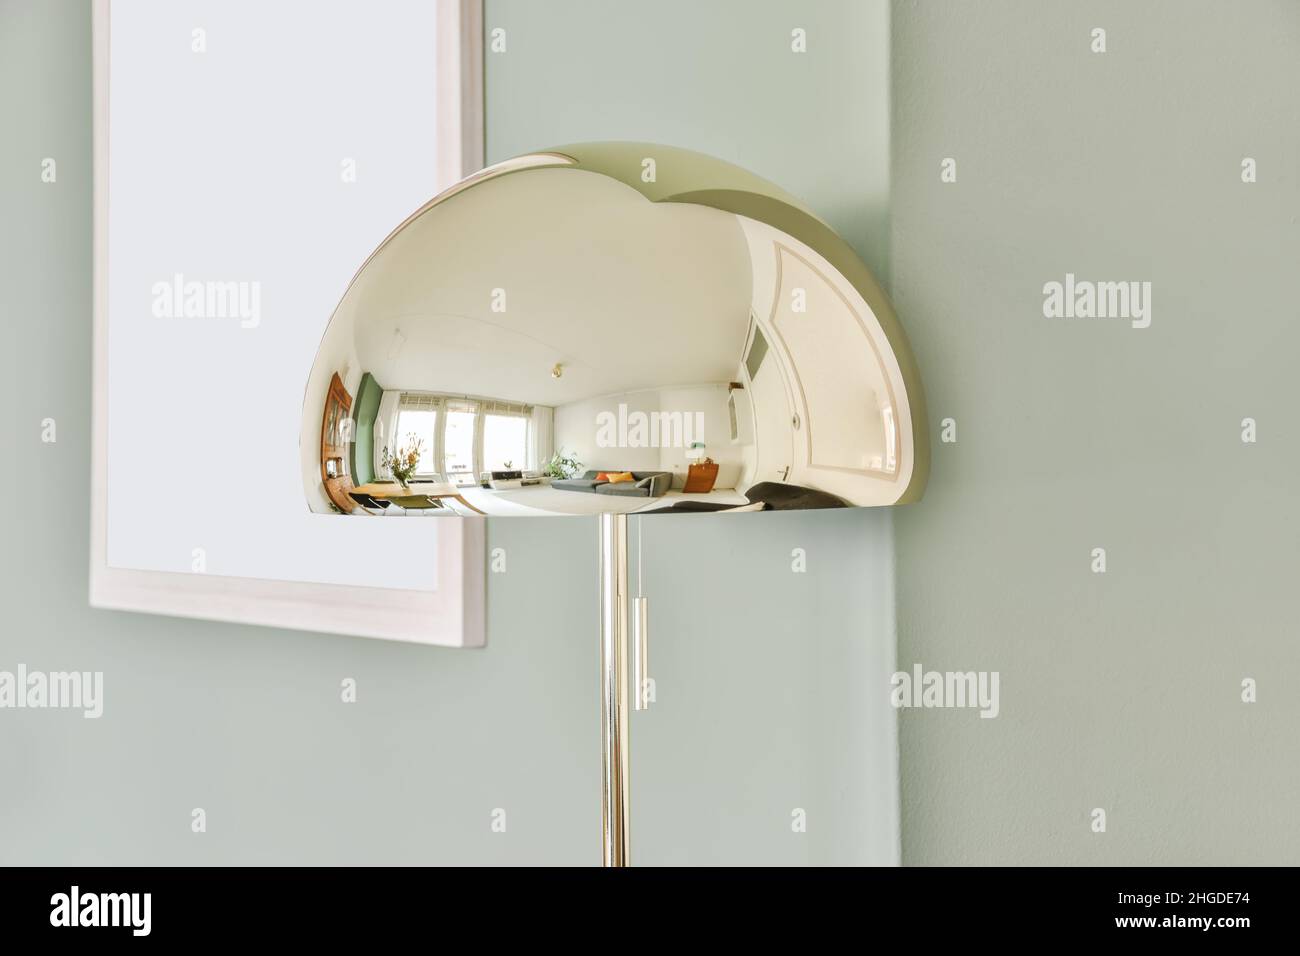 A delightful mirrored designer lamp reflecting the room Stock Photo